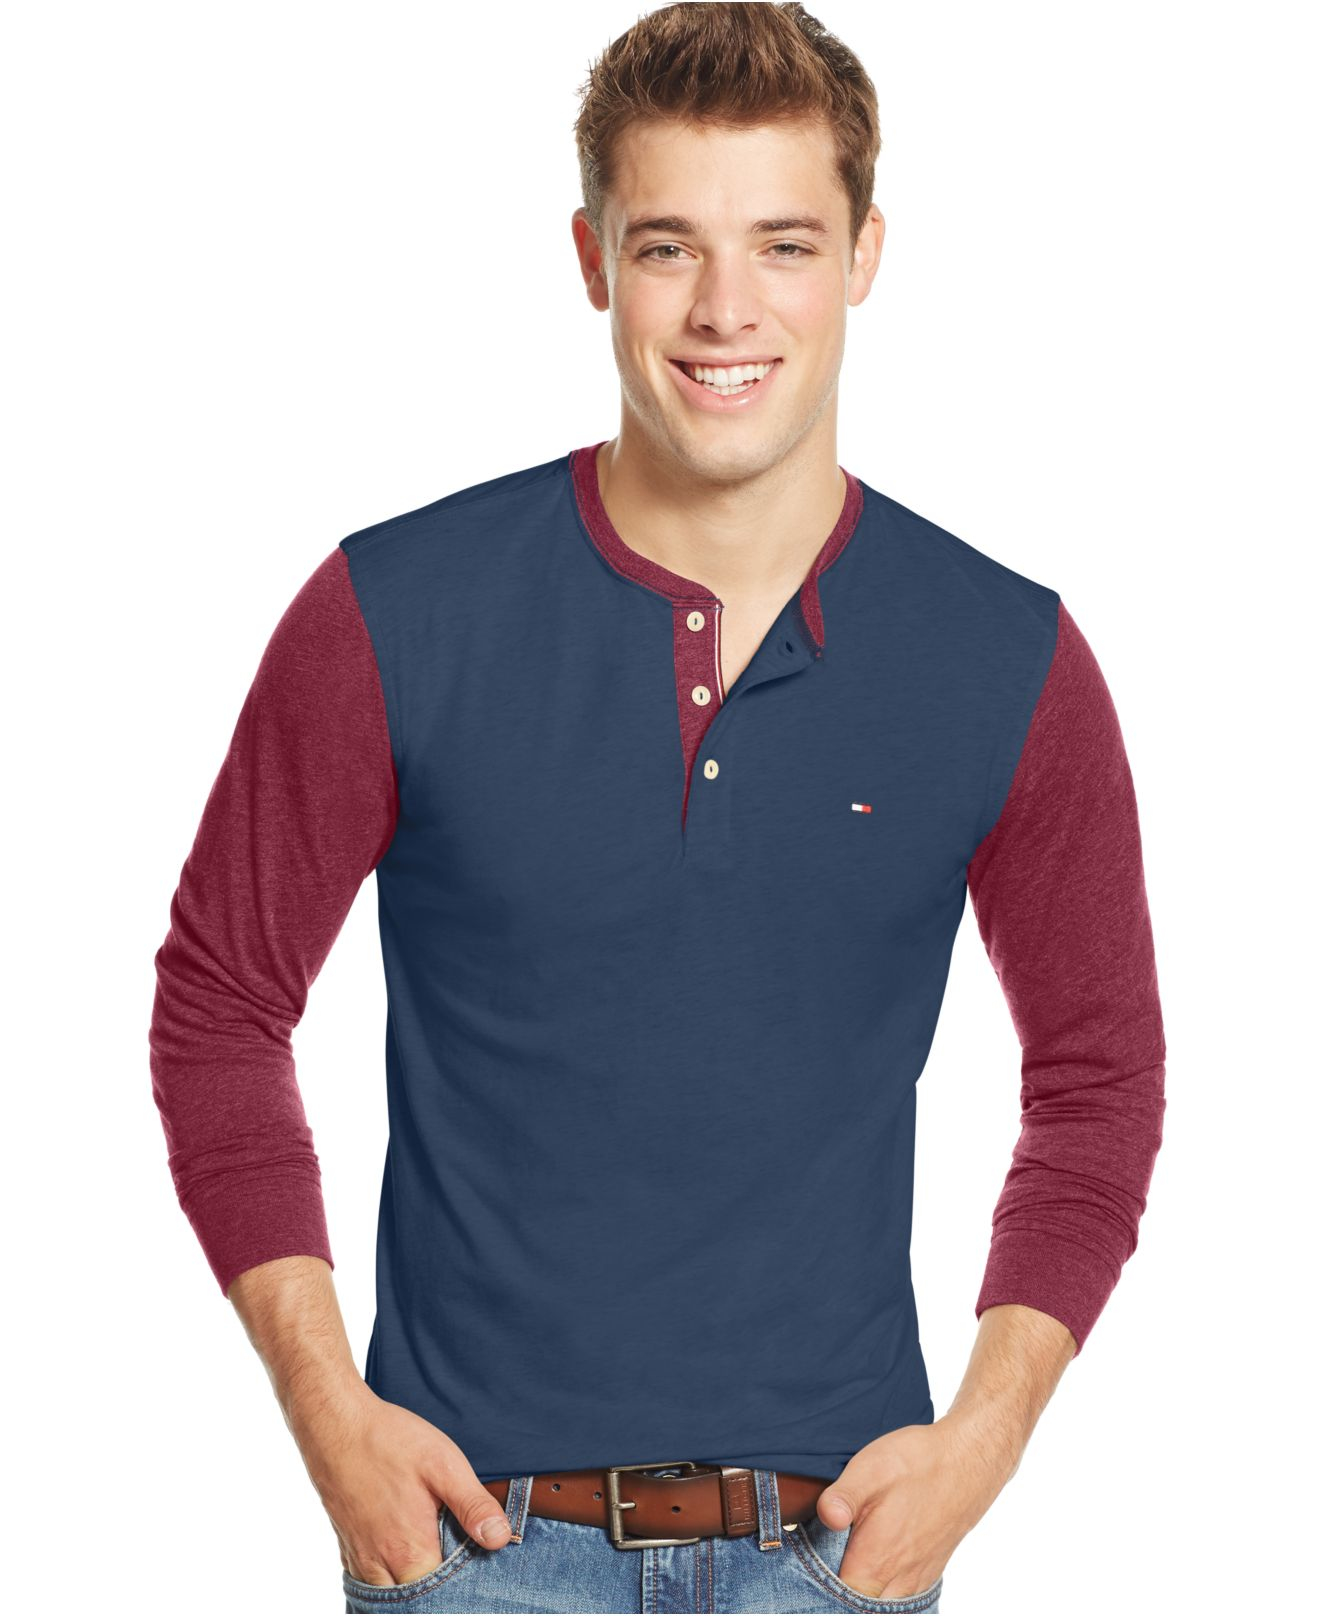 Tommy Hilfiger Long-sleeve Colorblocked Henley Shirt in Blue for Men - Lyst